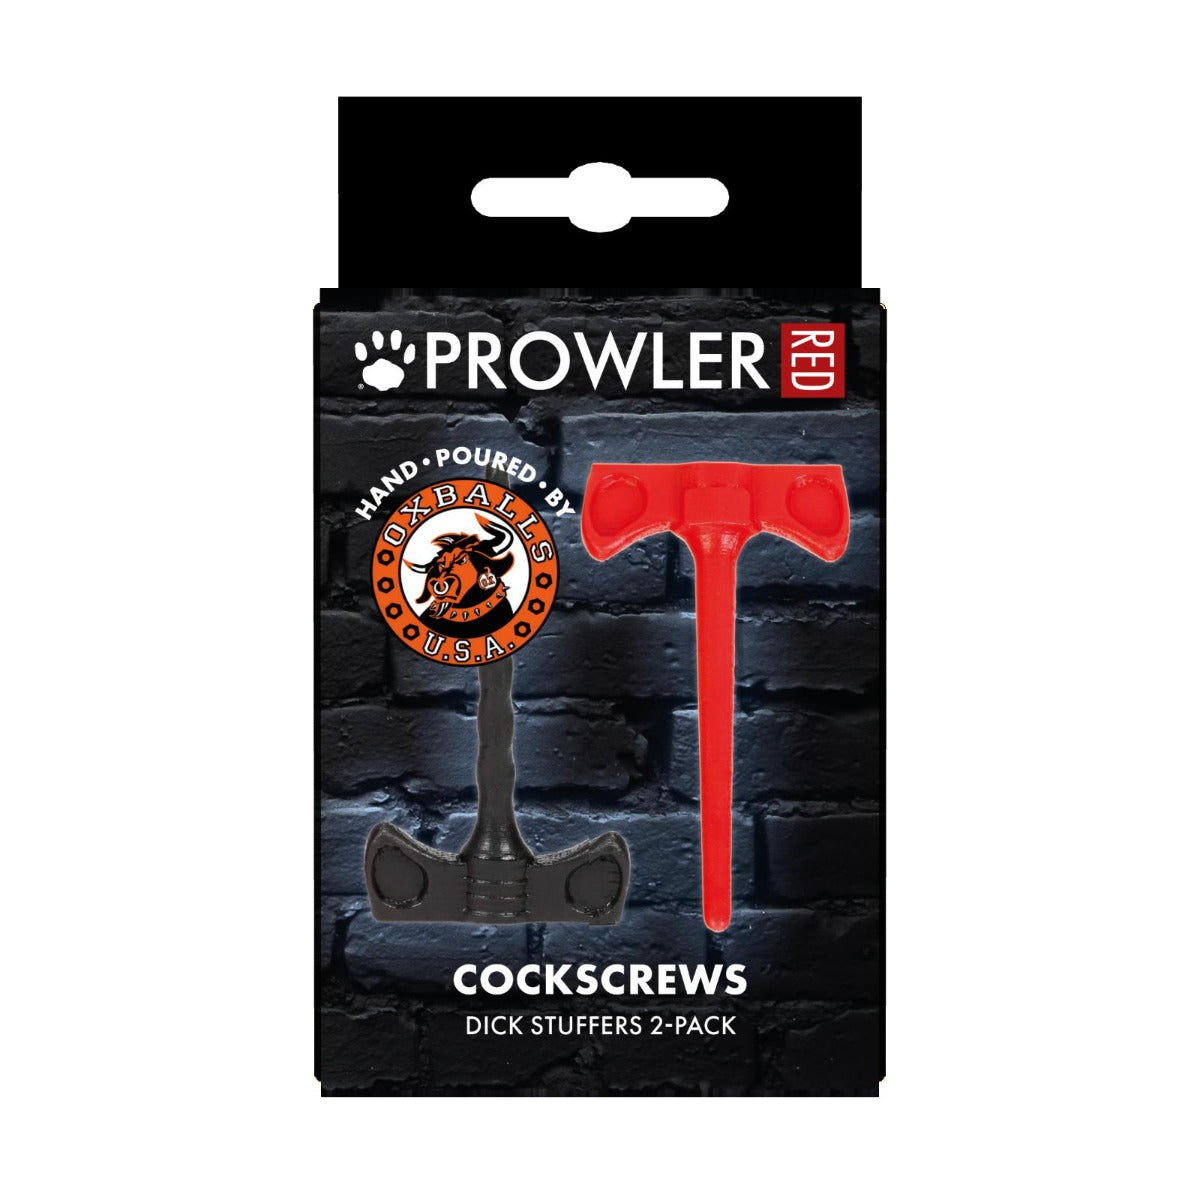 Prowler RED Cockscrews by Oxballs (7020779733156)